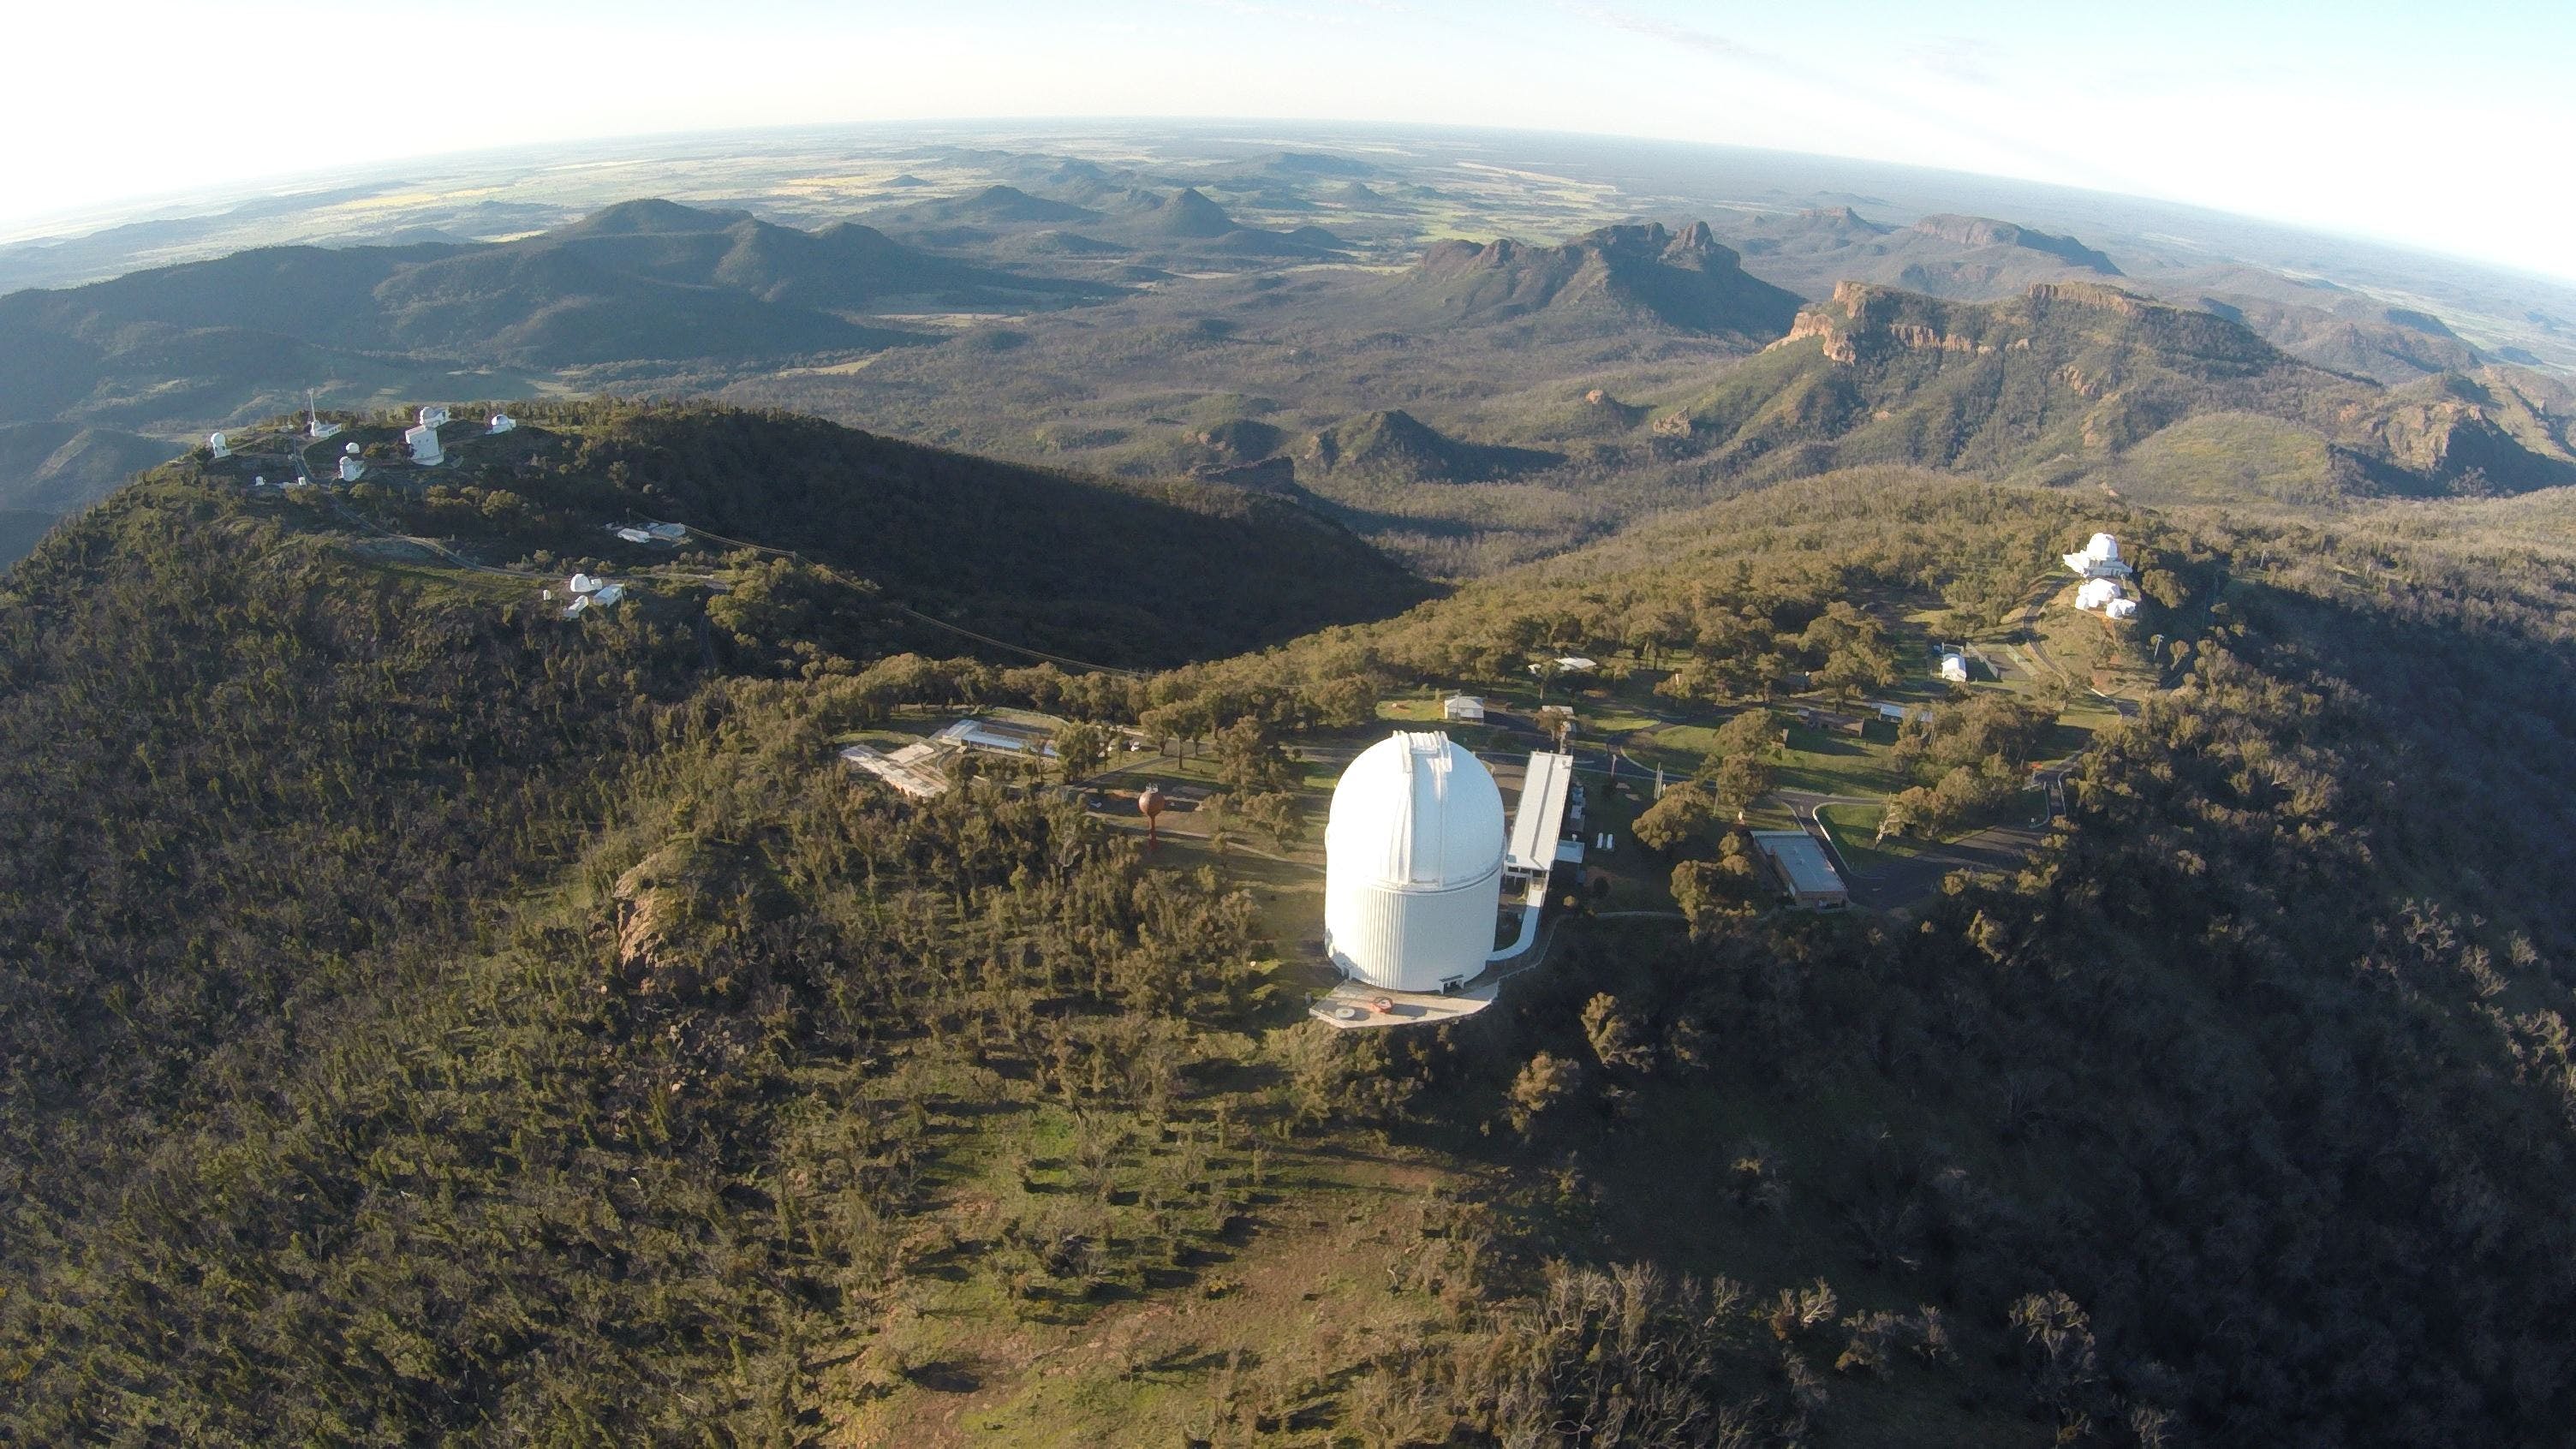 Siding Spring Observatory - Tweed Heads Accommodation